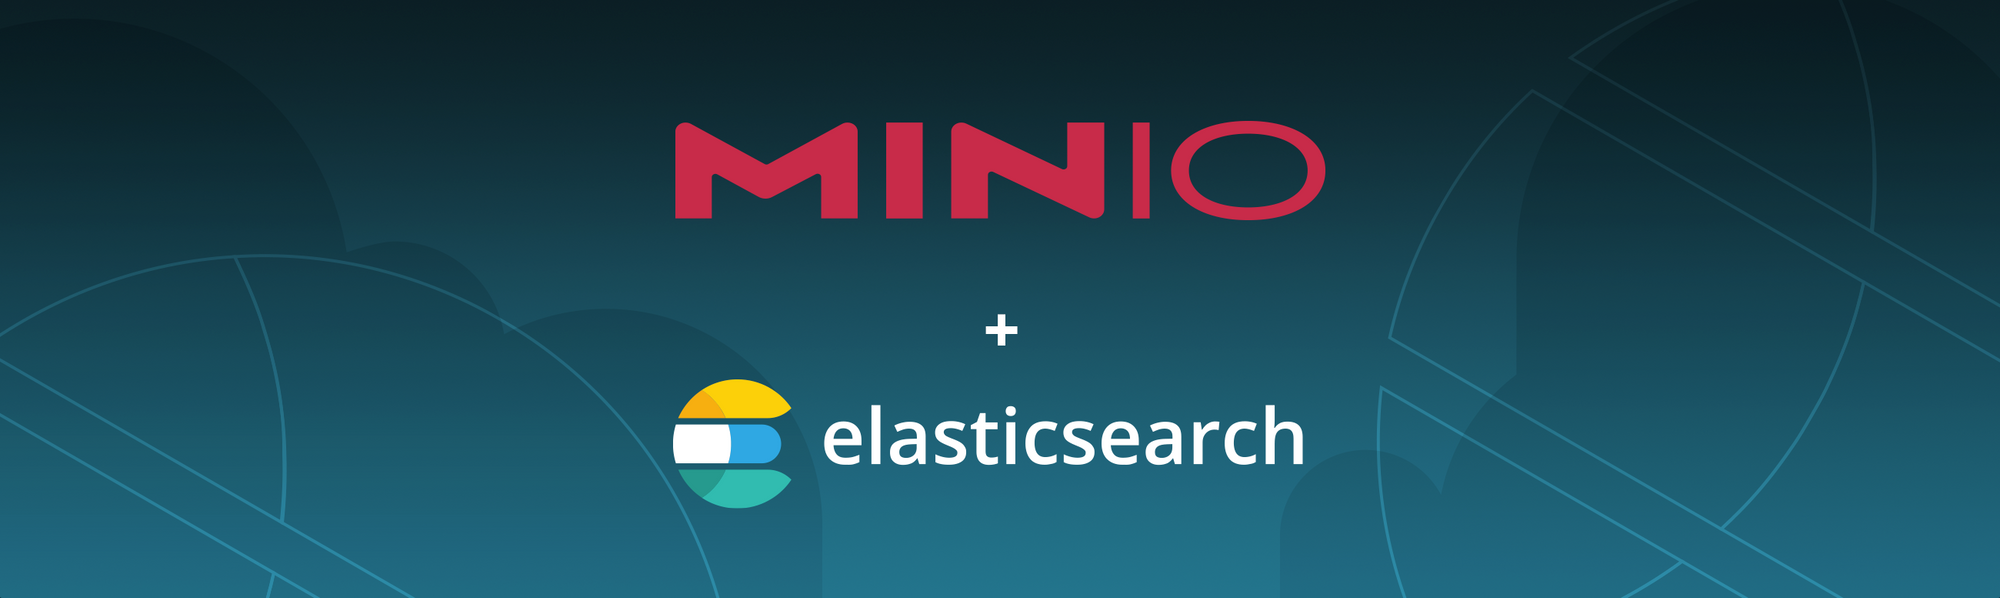 Visualize usage patterns in MinIO using Elasticsearch and Beats